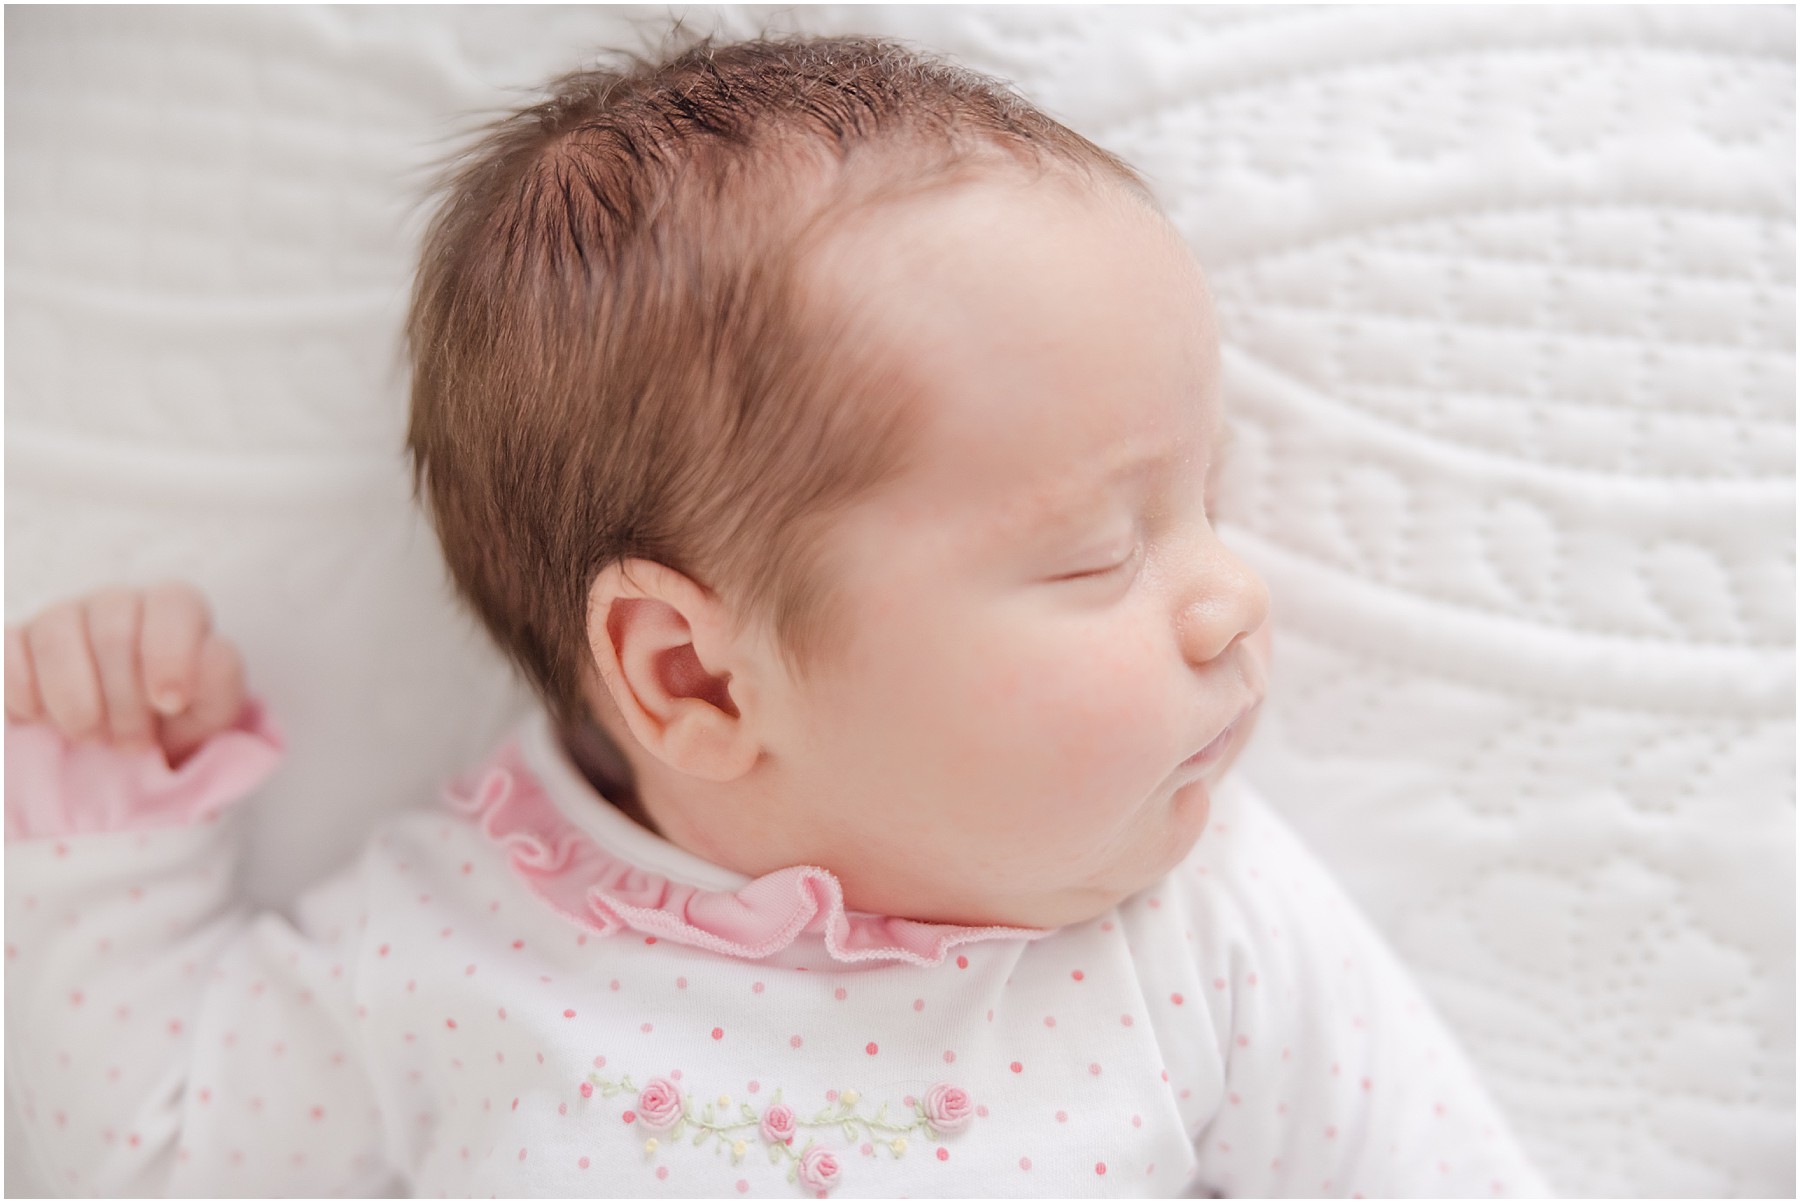 Close up portrait of a baby girl who is alseep.